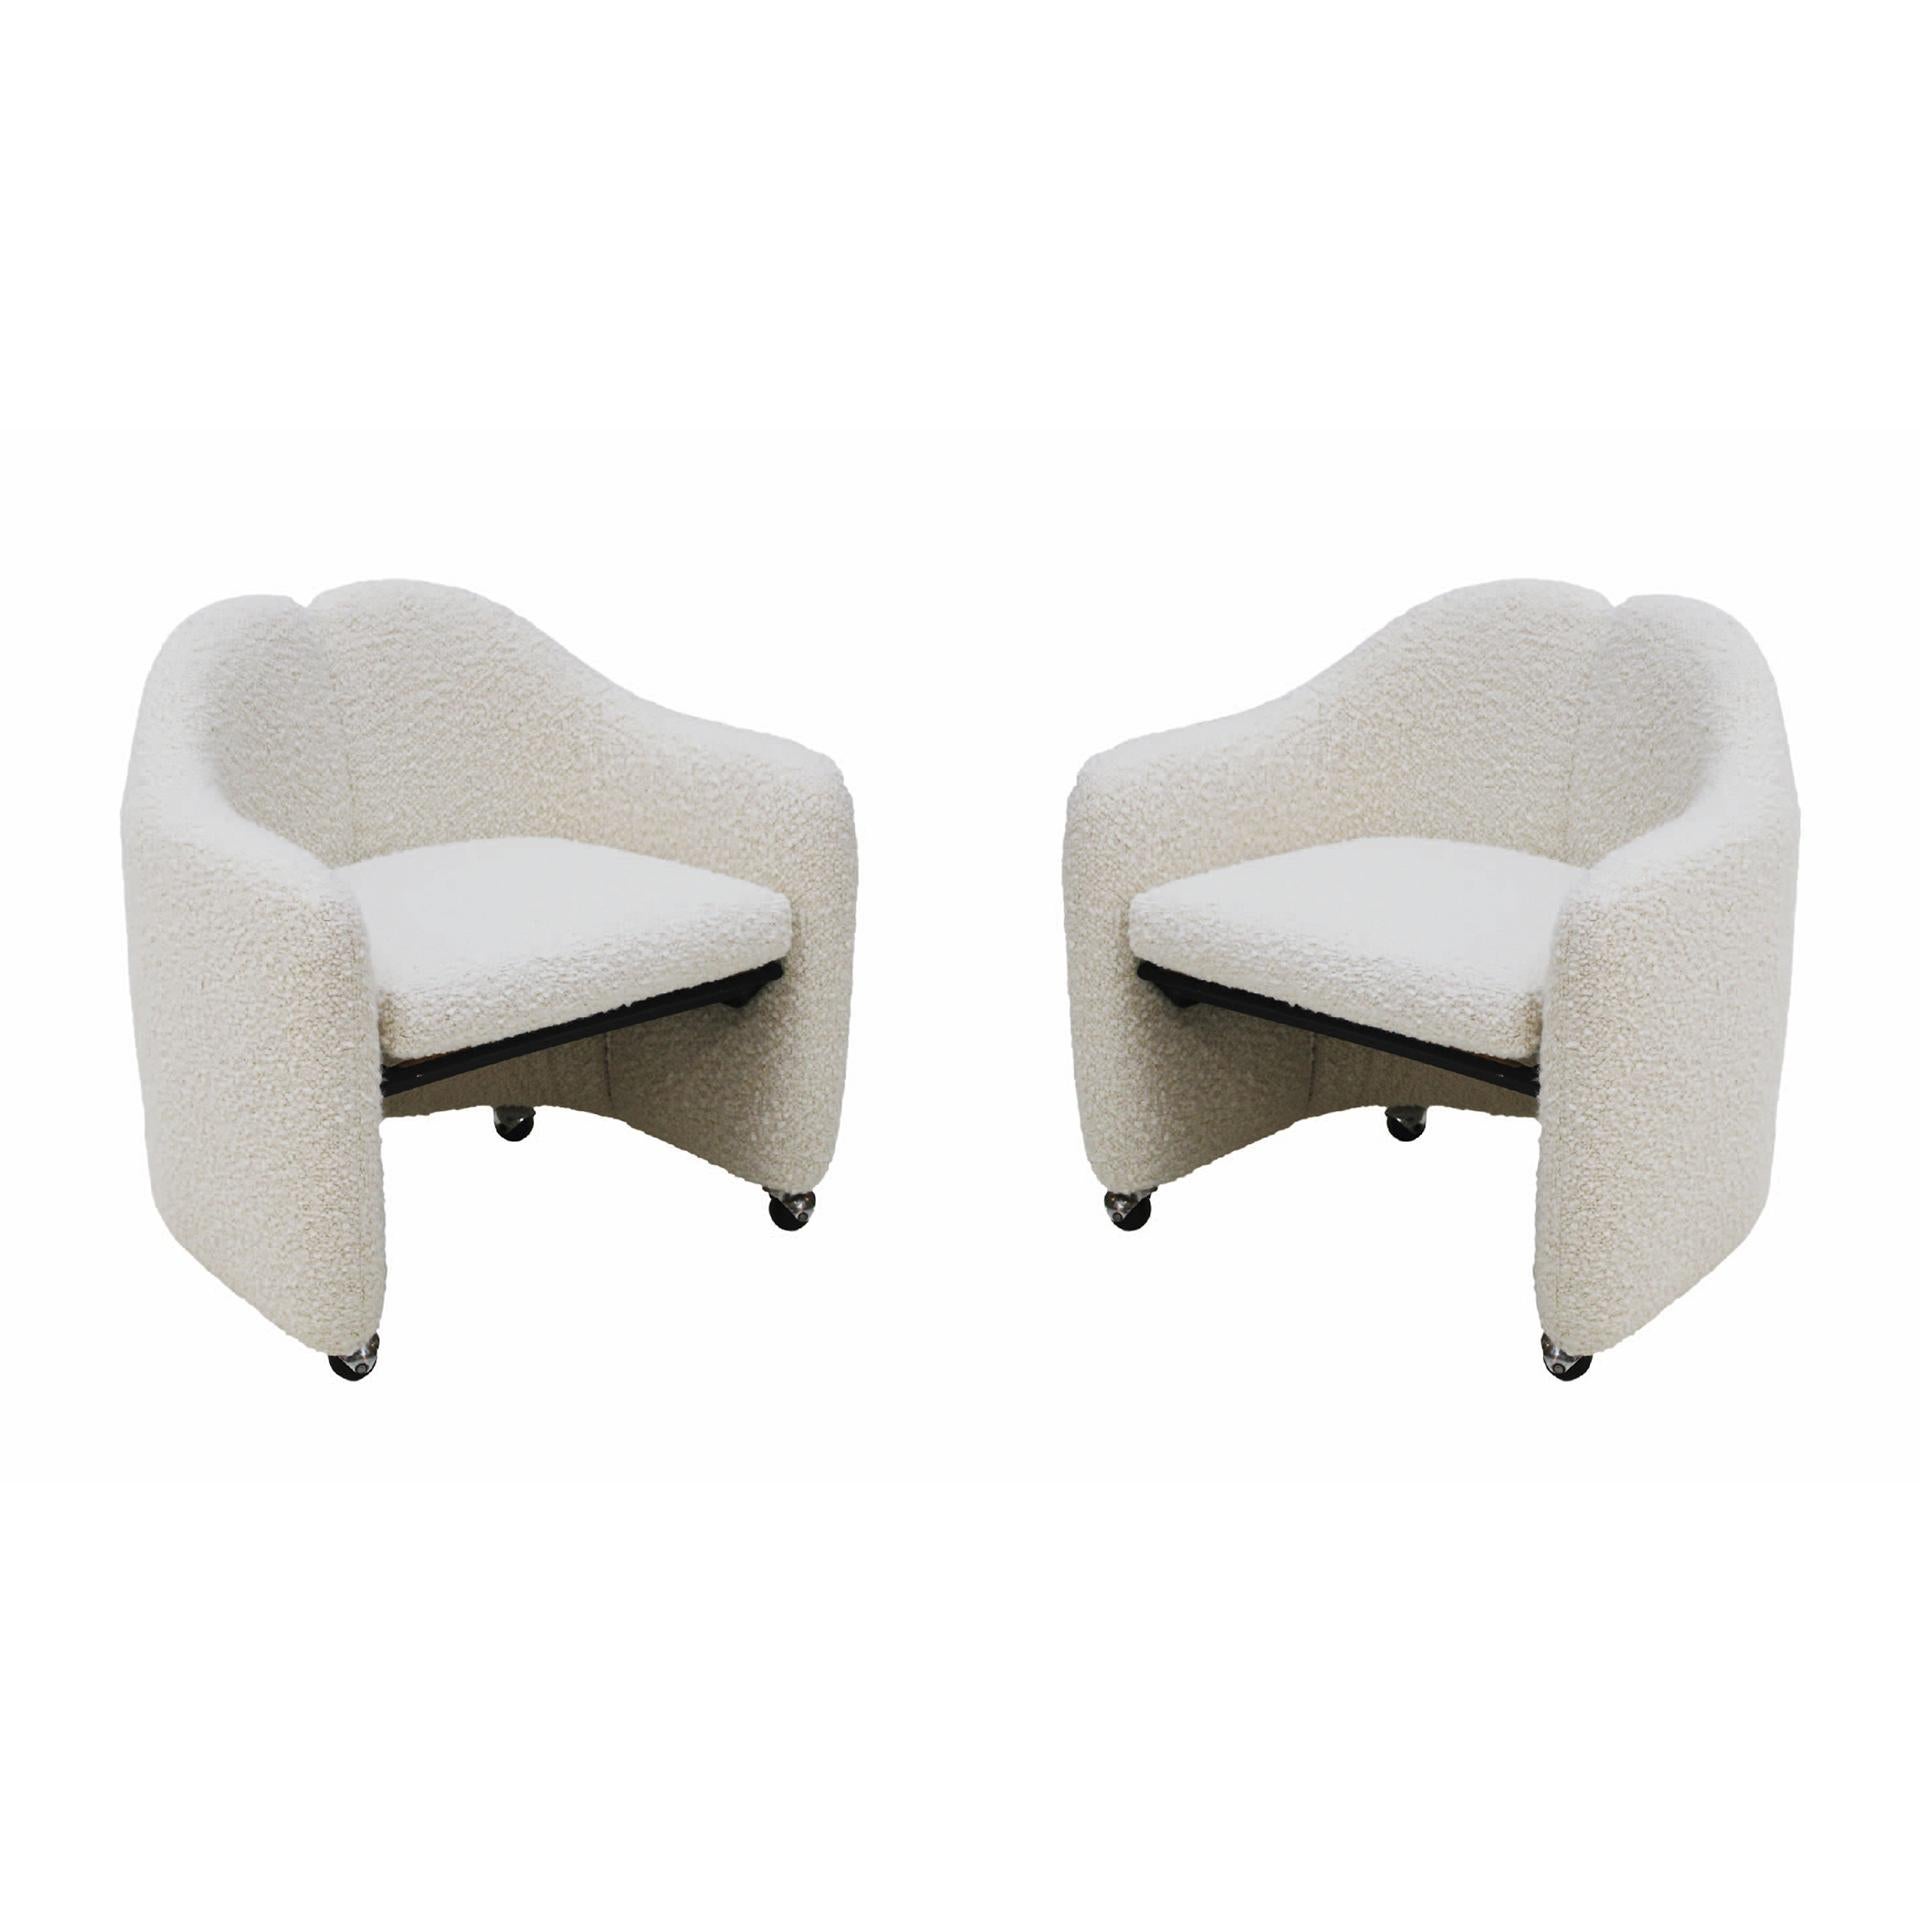 Pair of two PS142 Chairs Designed By Eugenio Gerli, Italy 1960's For Sale